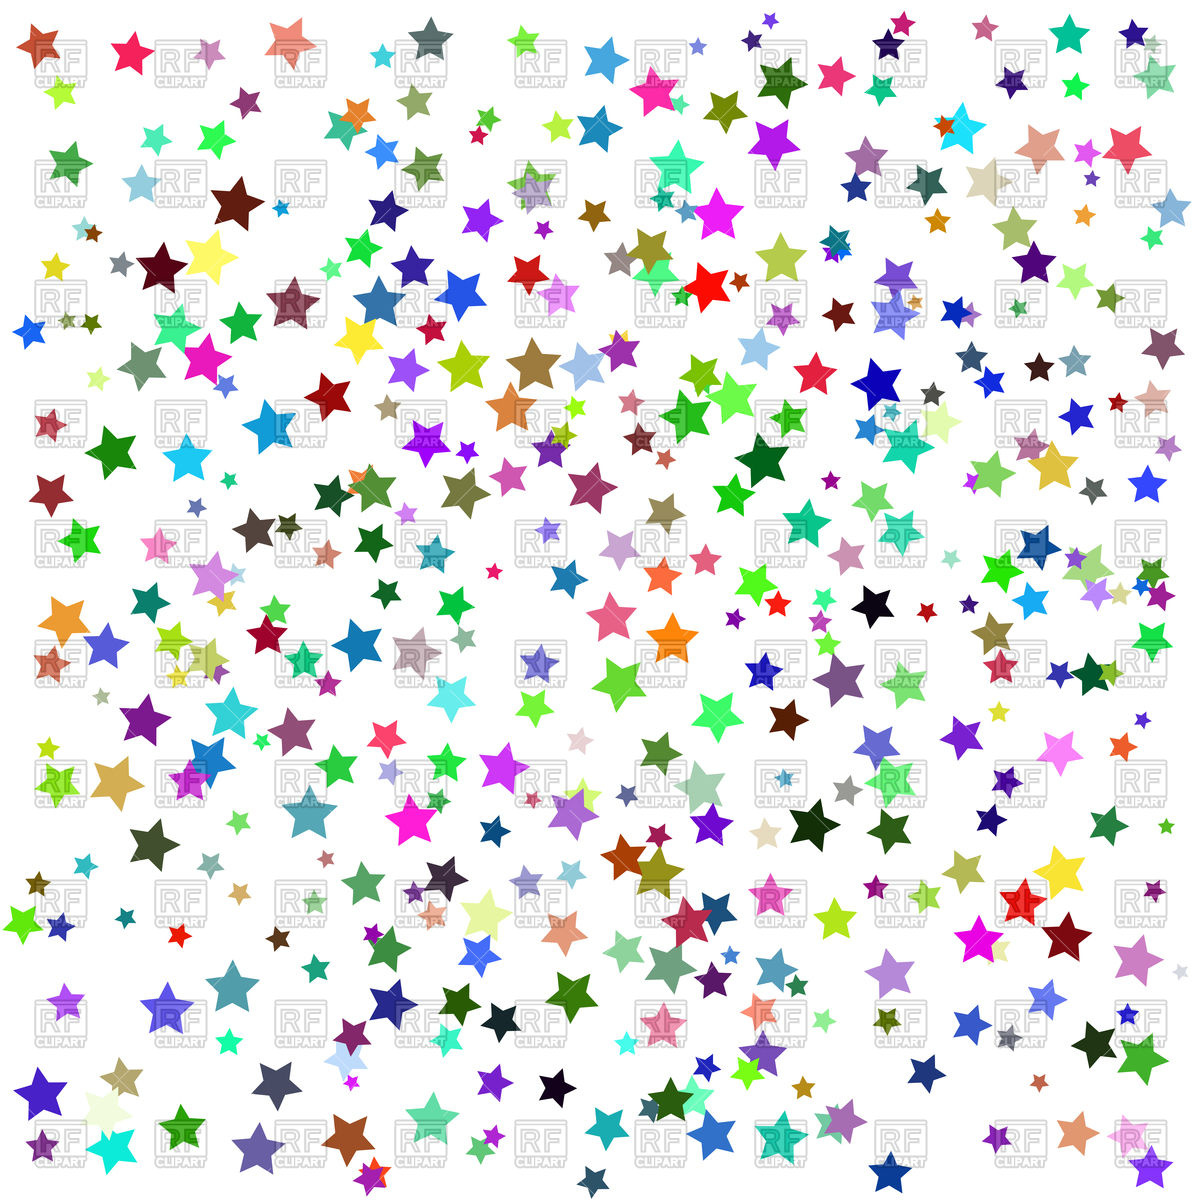 Free Star Background Cliparts, Download Free Clip Art, Free